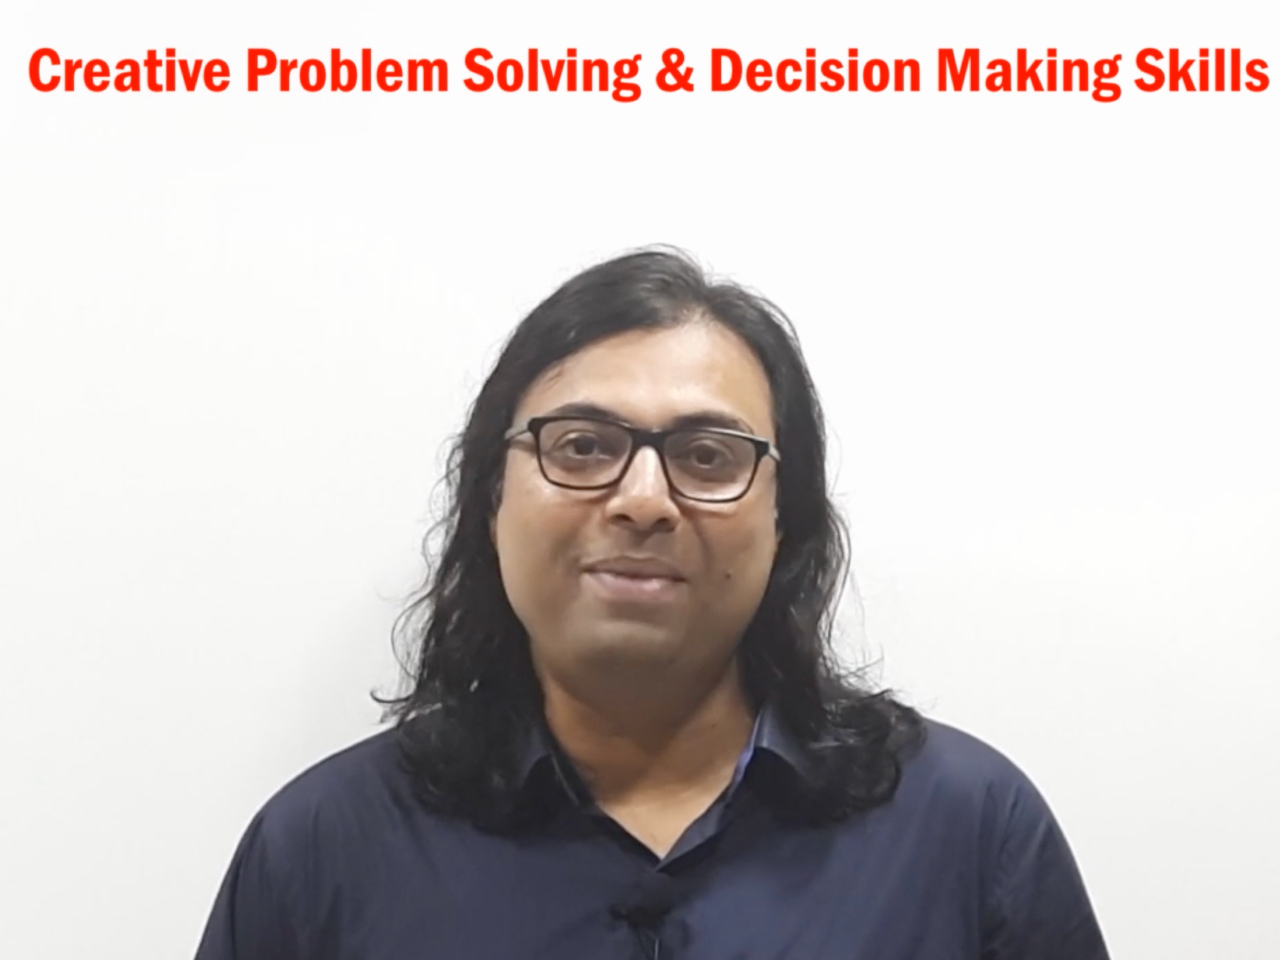 link to Master Class - Creative Problem Solving & Decision Making